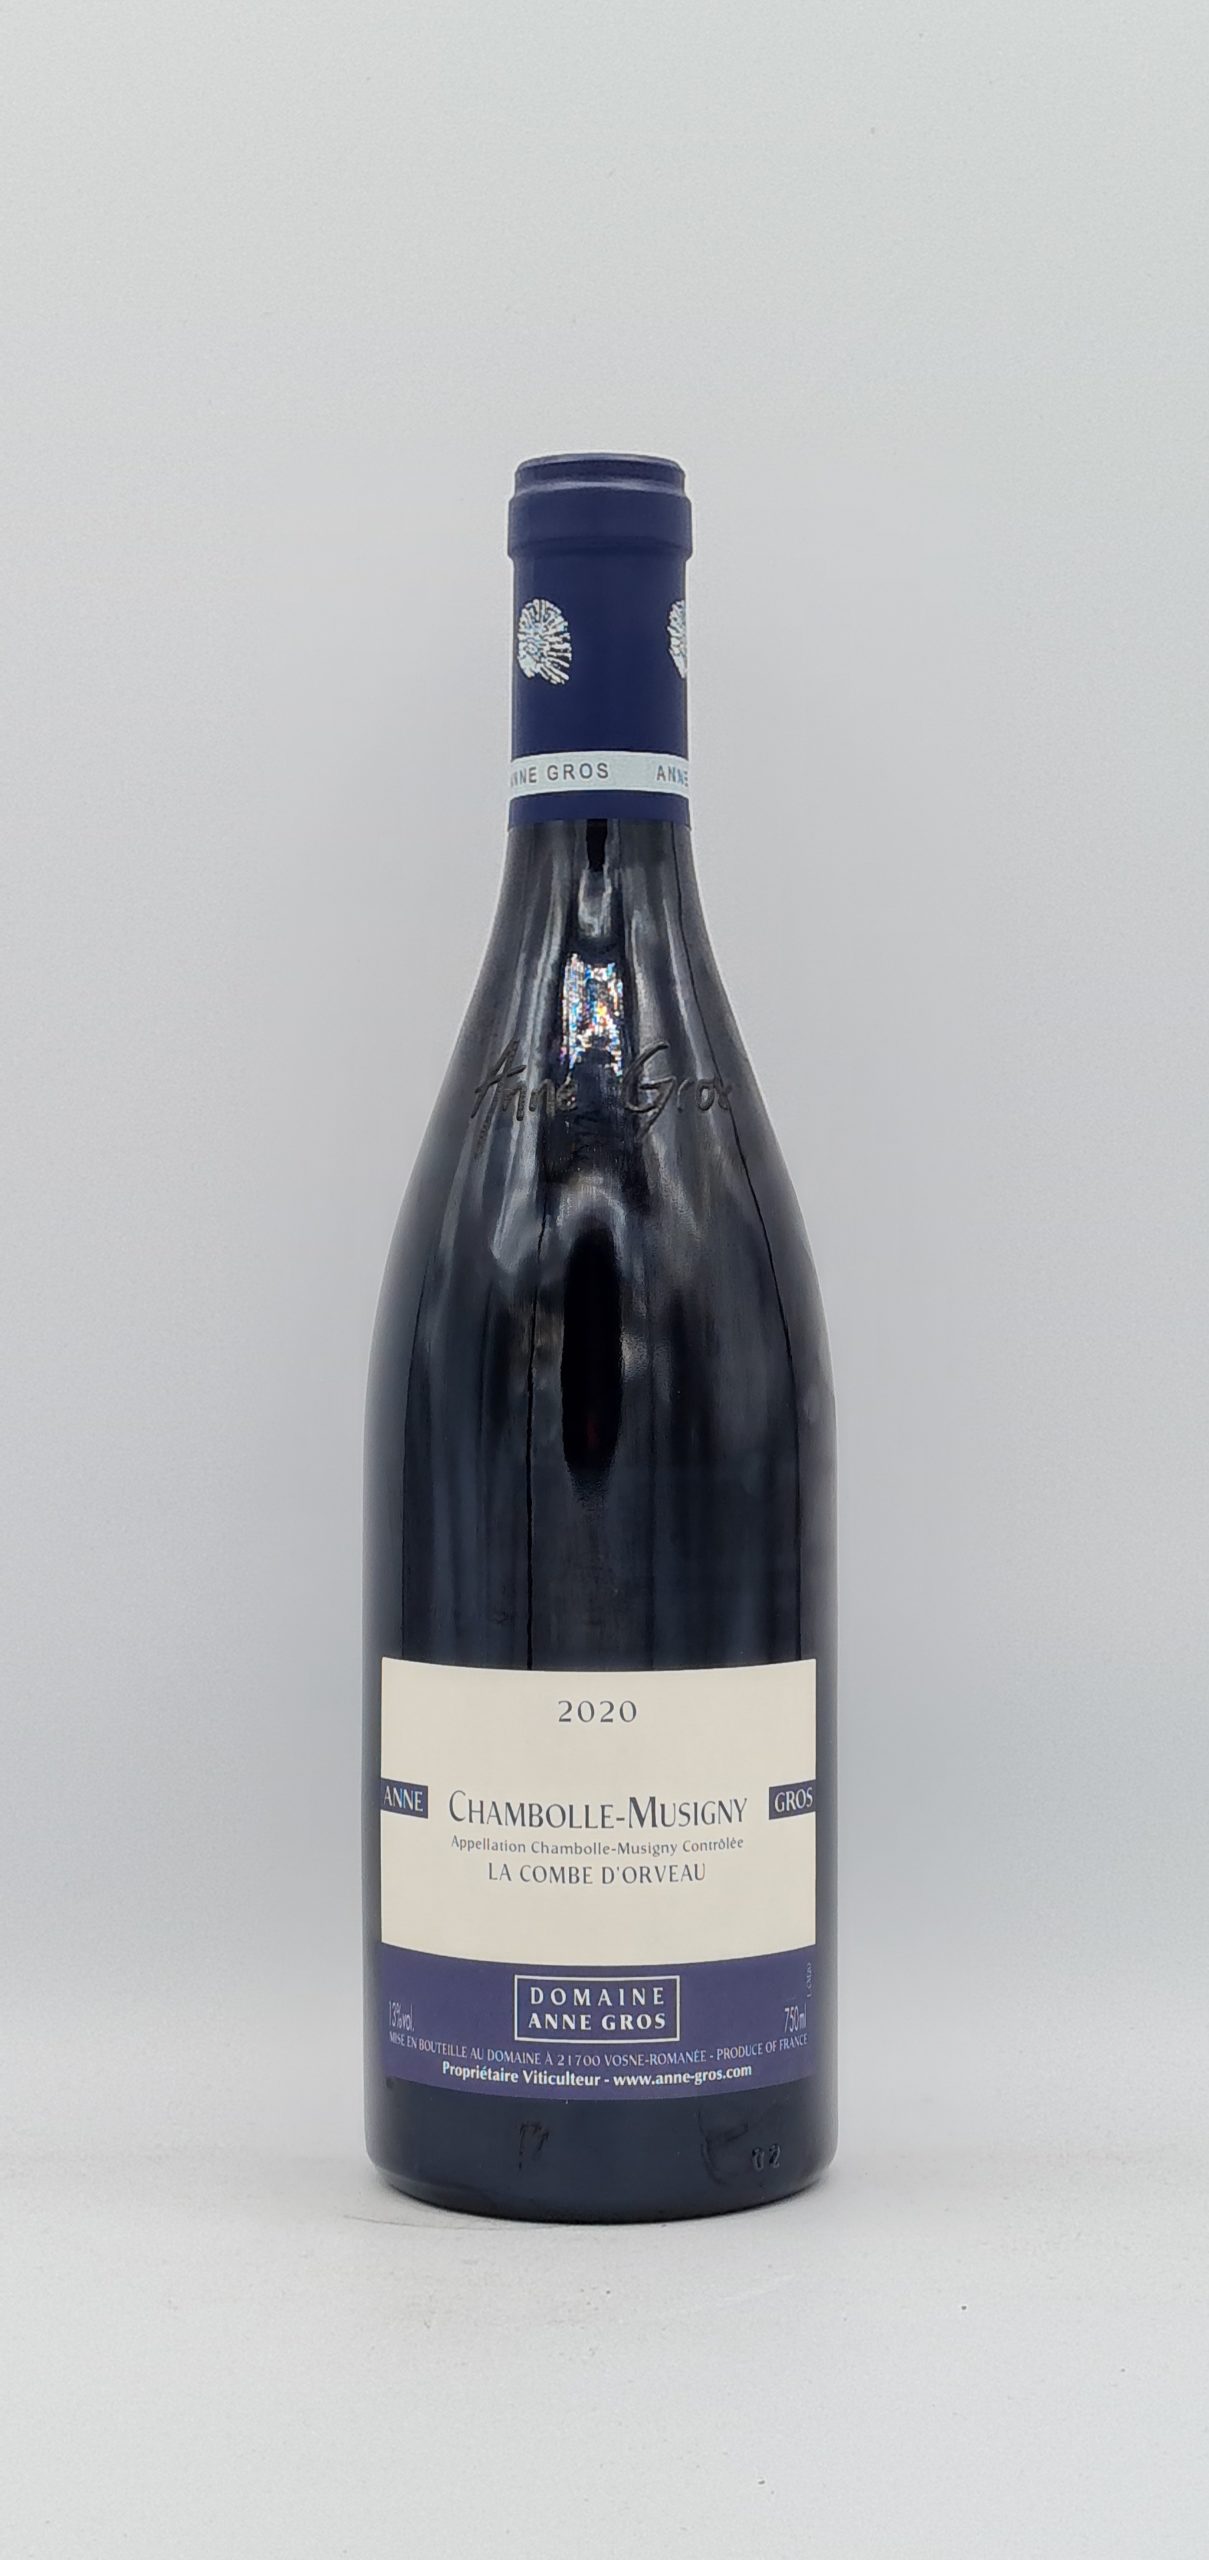 Chambolle-Musigny “La Combe d’Orveaux” 2020 Domaine Anne Gros